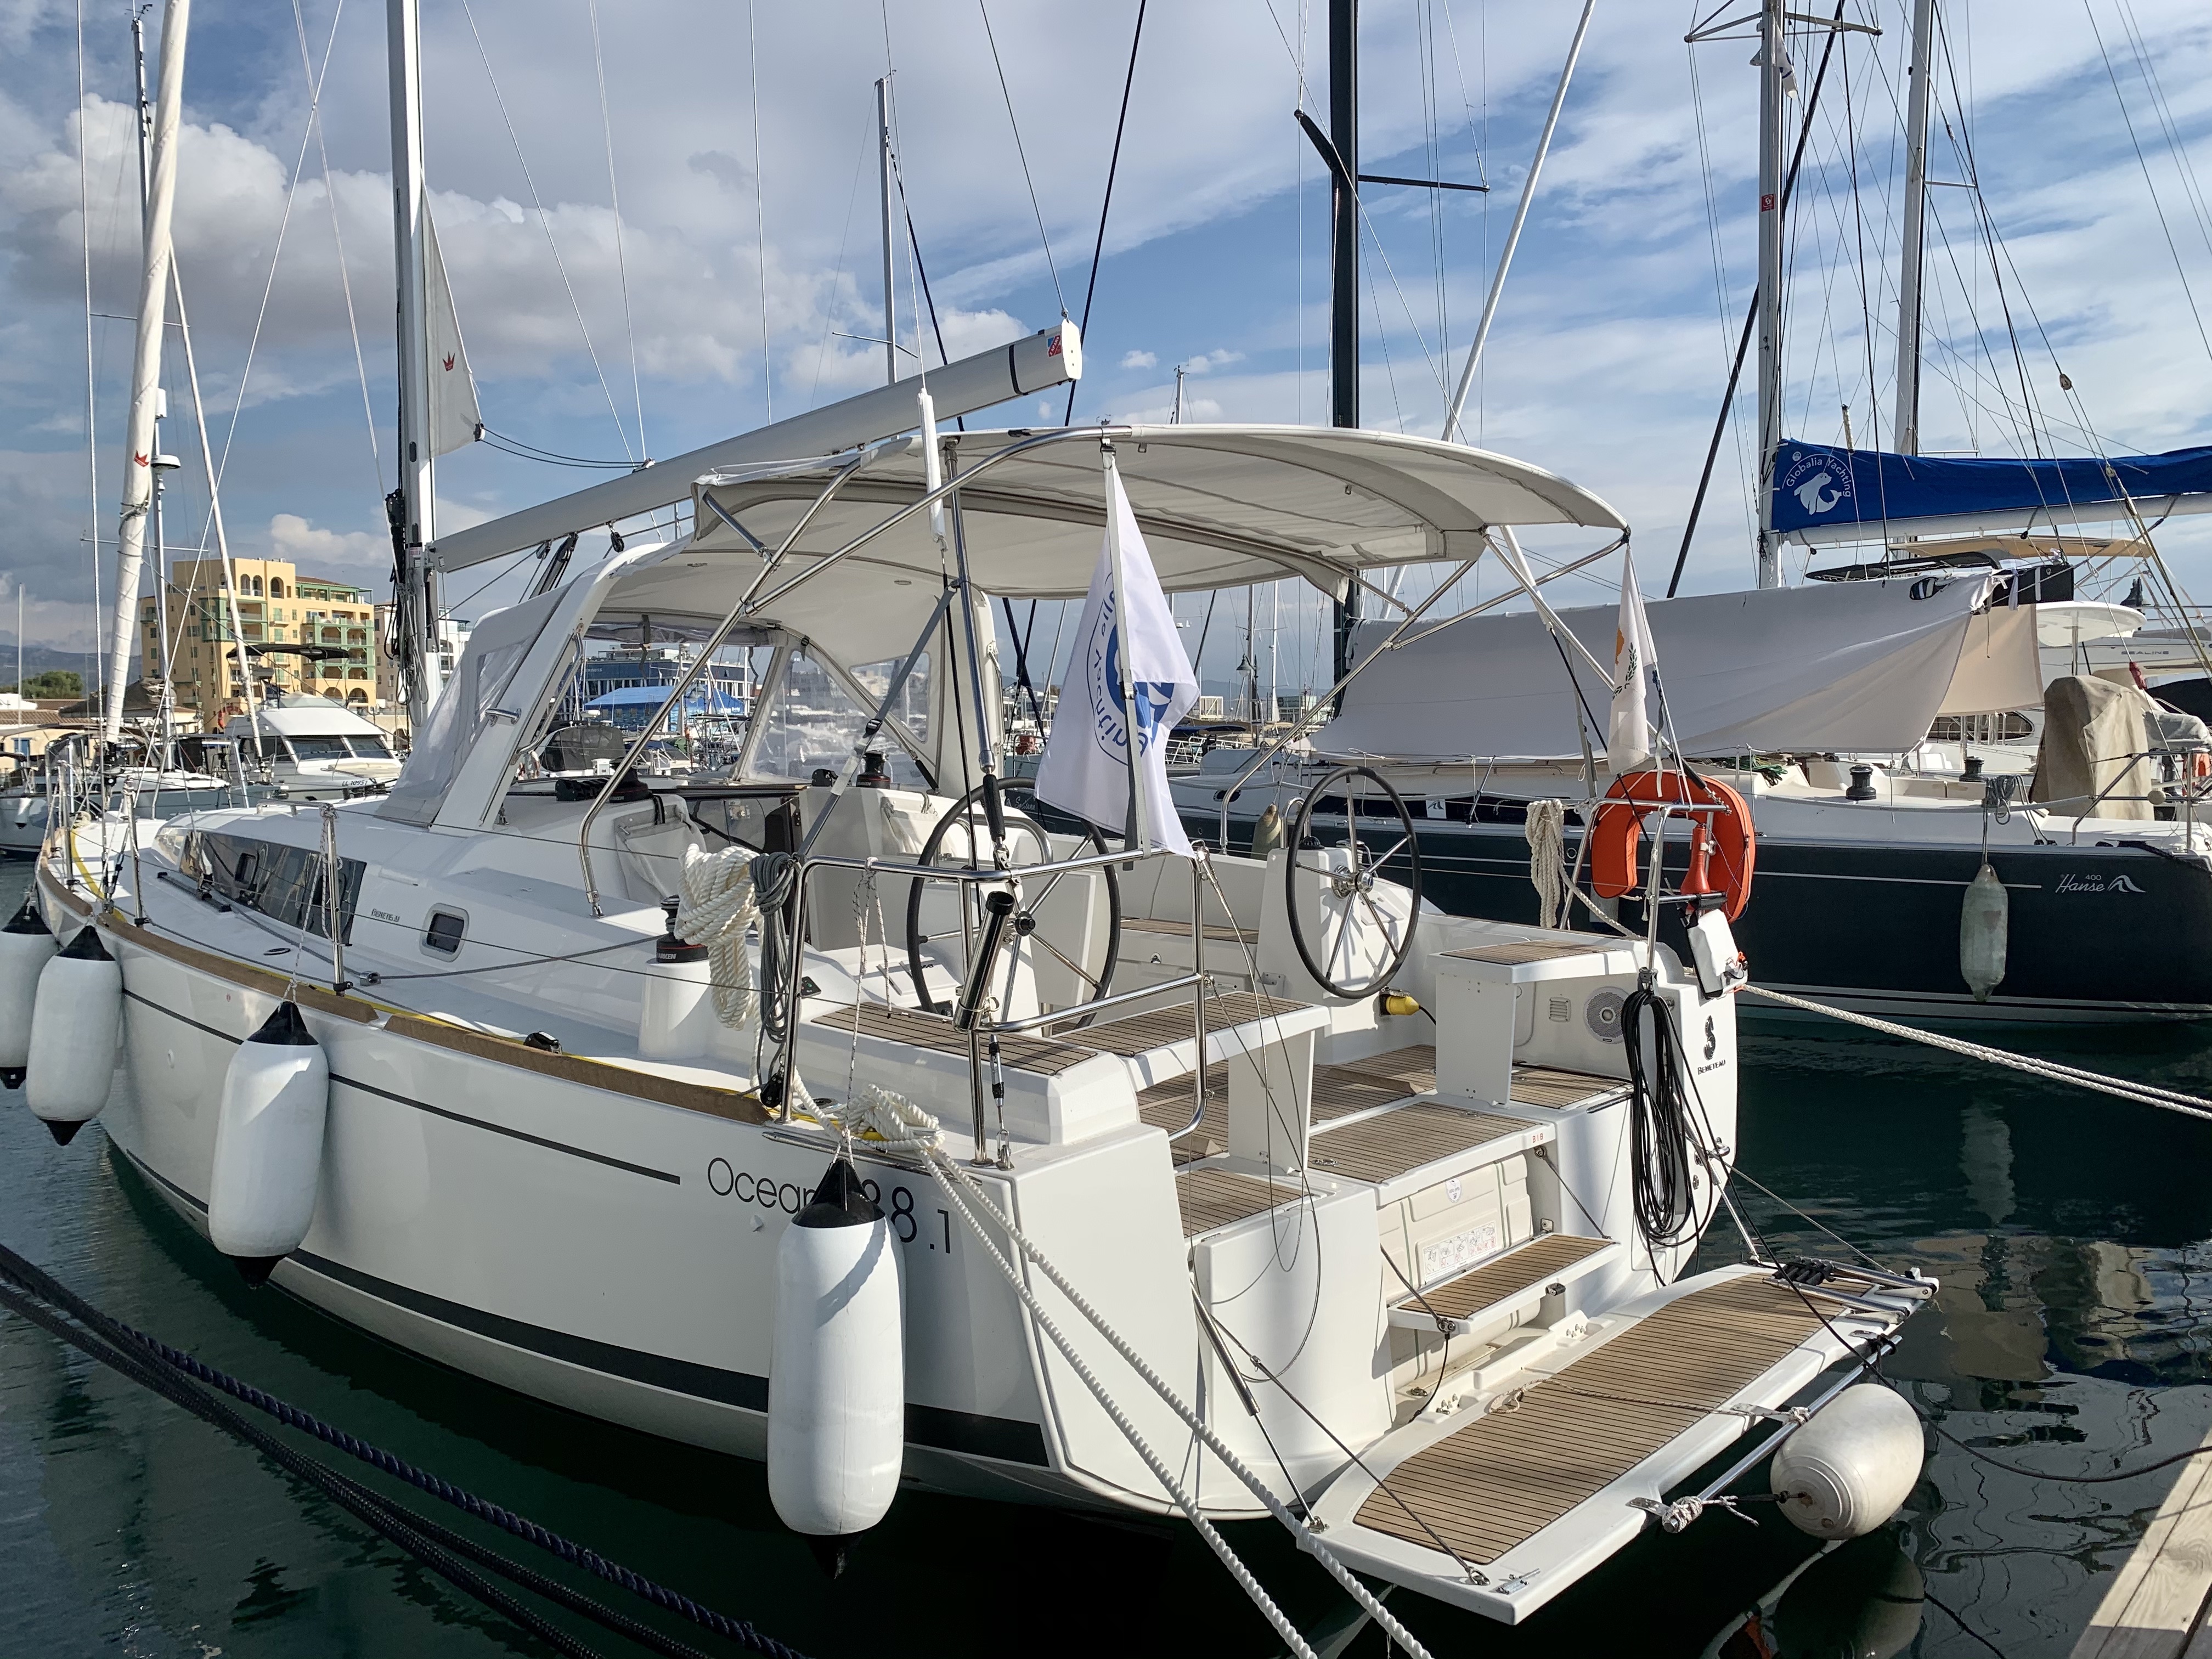 Oceanis 38.1 - Yacht Charter Cyprus & Boat hire in Cyprus Limassol Limassol Marina 2